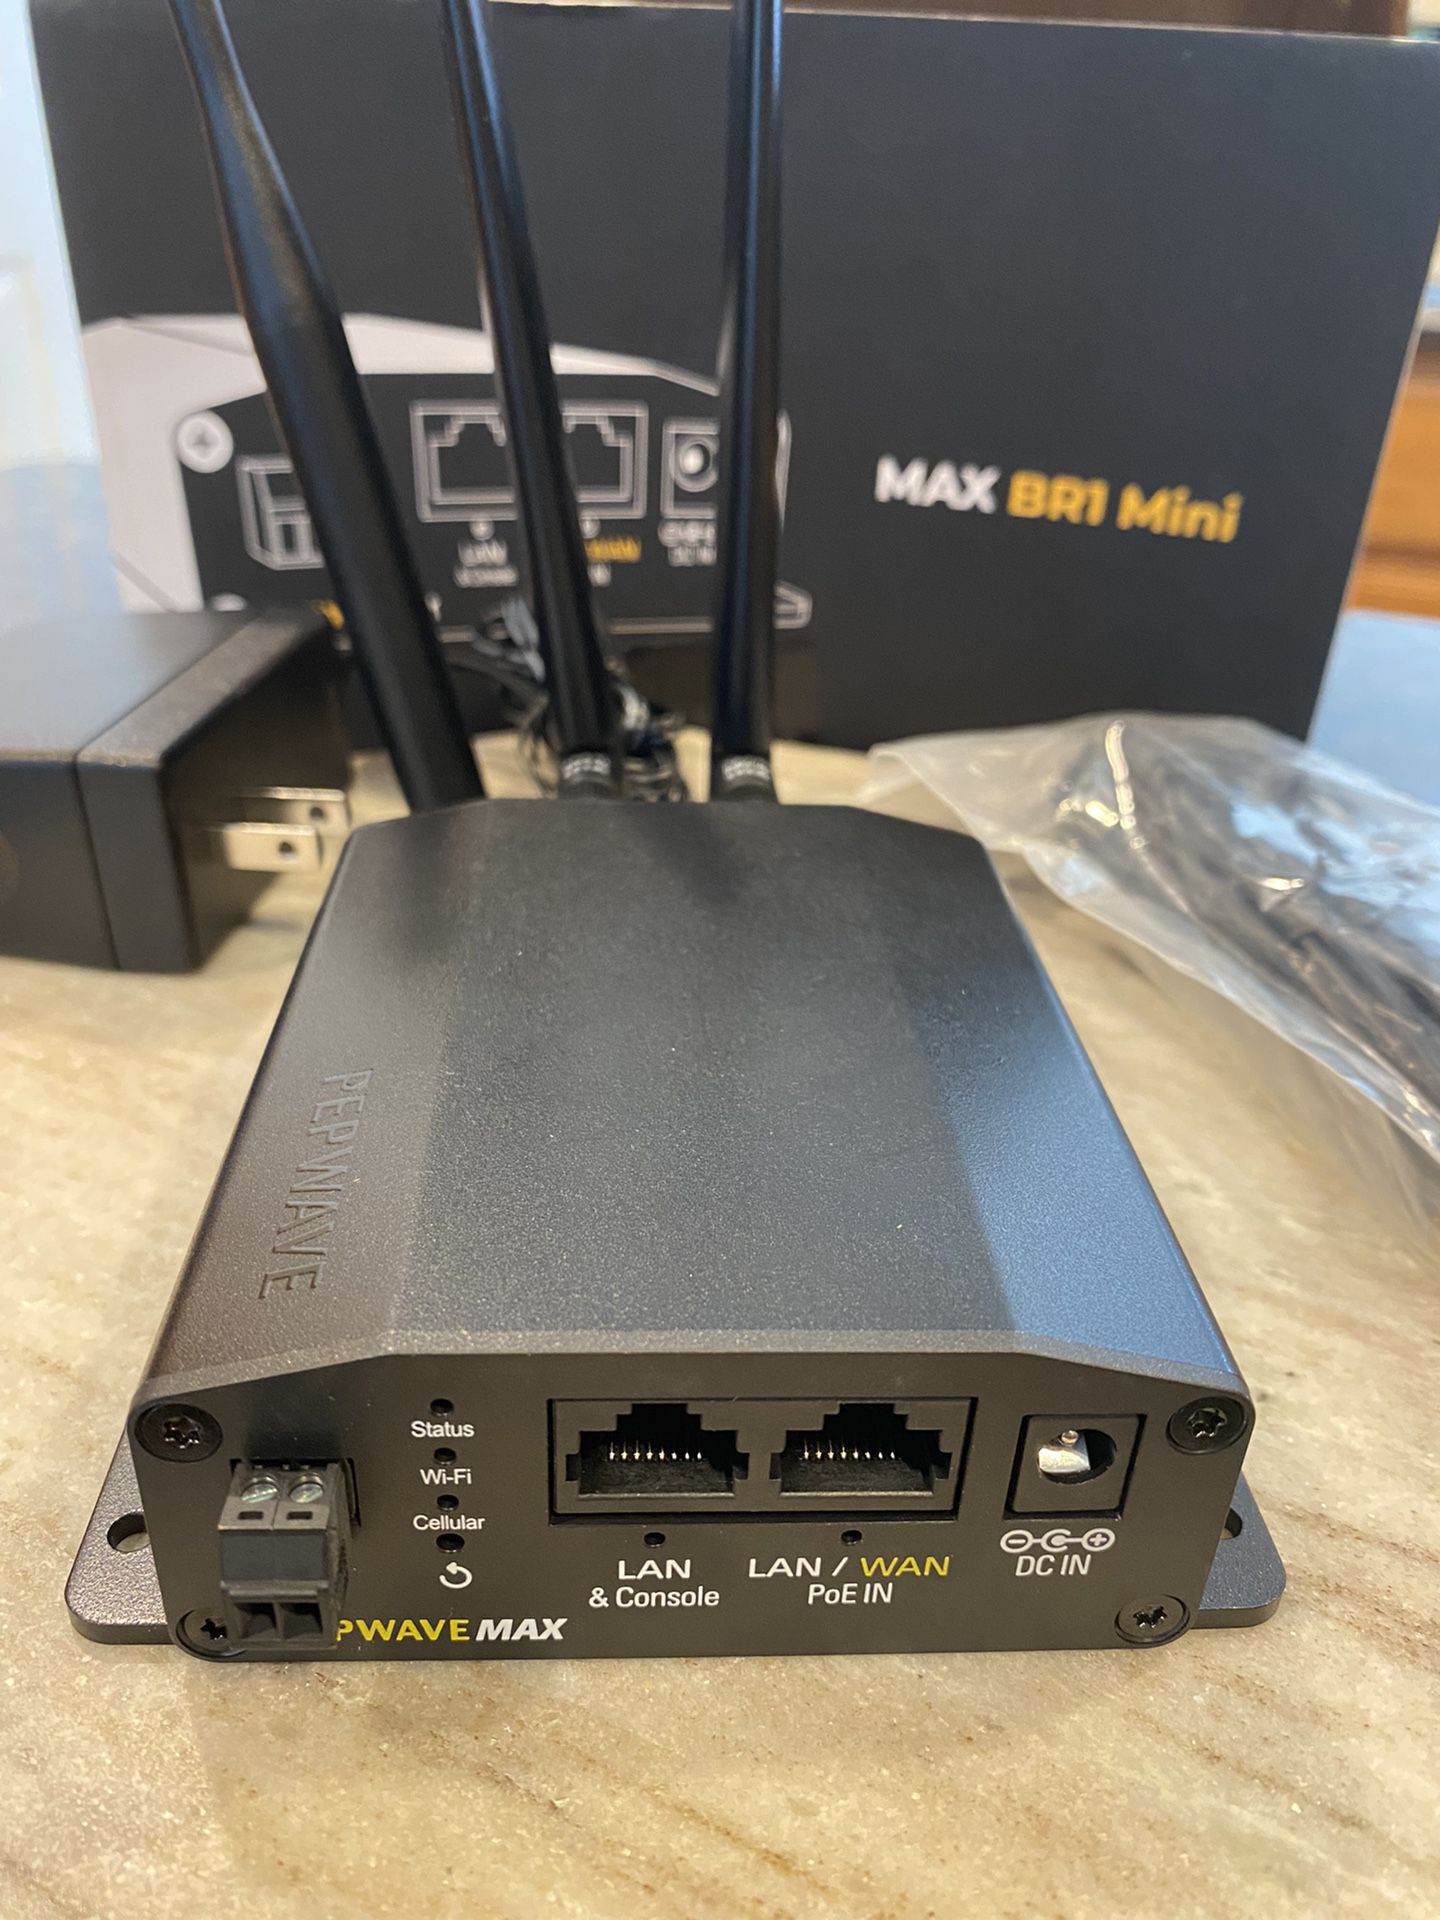 Peplink MAX BR1 Mini LTE (CAT-4) | Home Businesses and Outdoor Activities 4G LT- Open Box - NEW